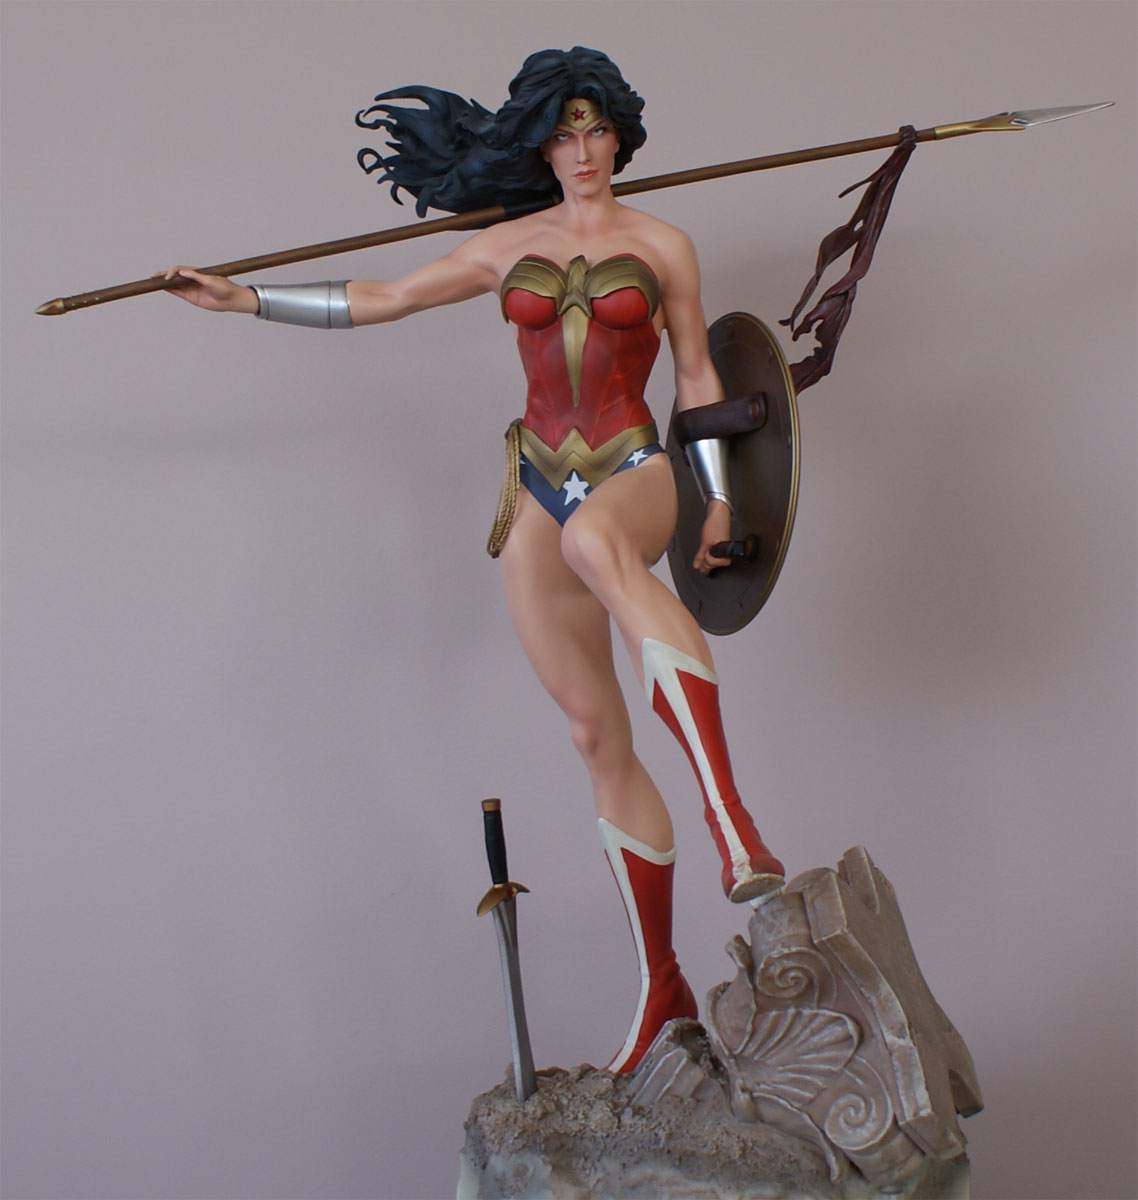 Wonder Woman: Saving the Day Premium Format Figure by Sideshow Collectibles